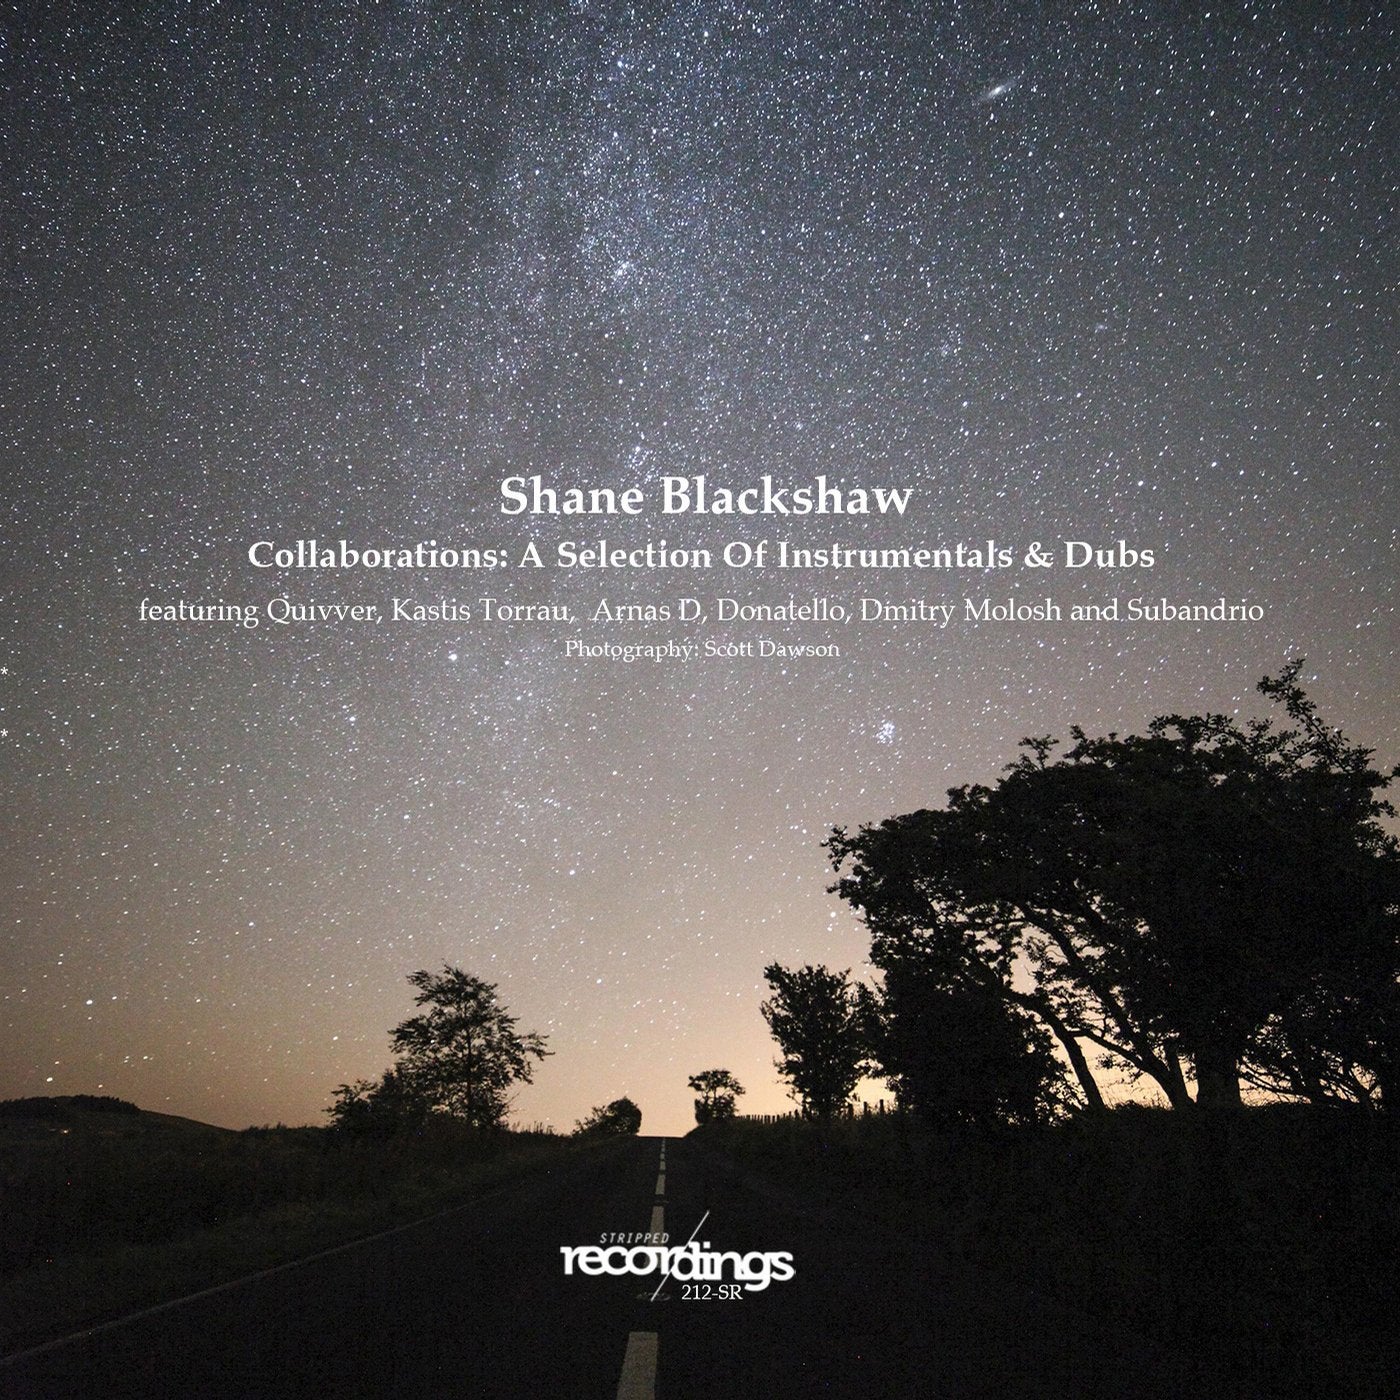 Collaborations: A Selection of Instrumentals & Dubs featuring Shane Blackshaw